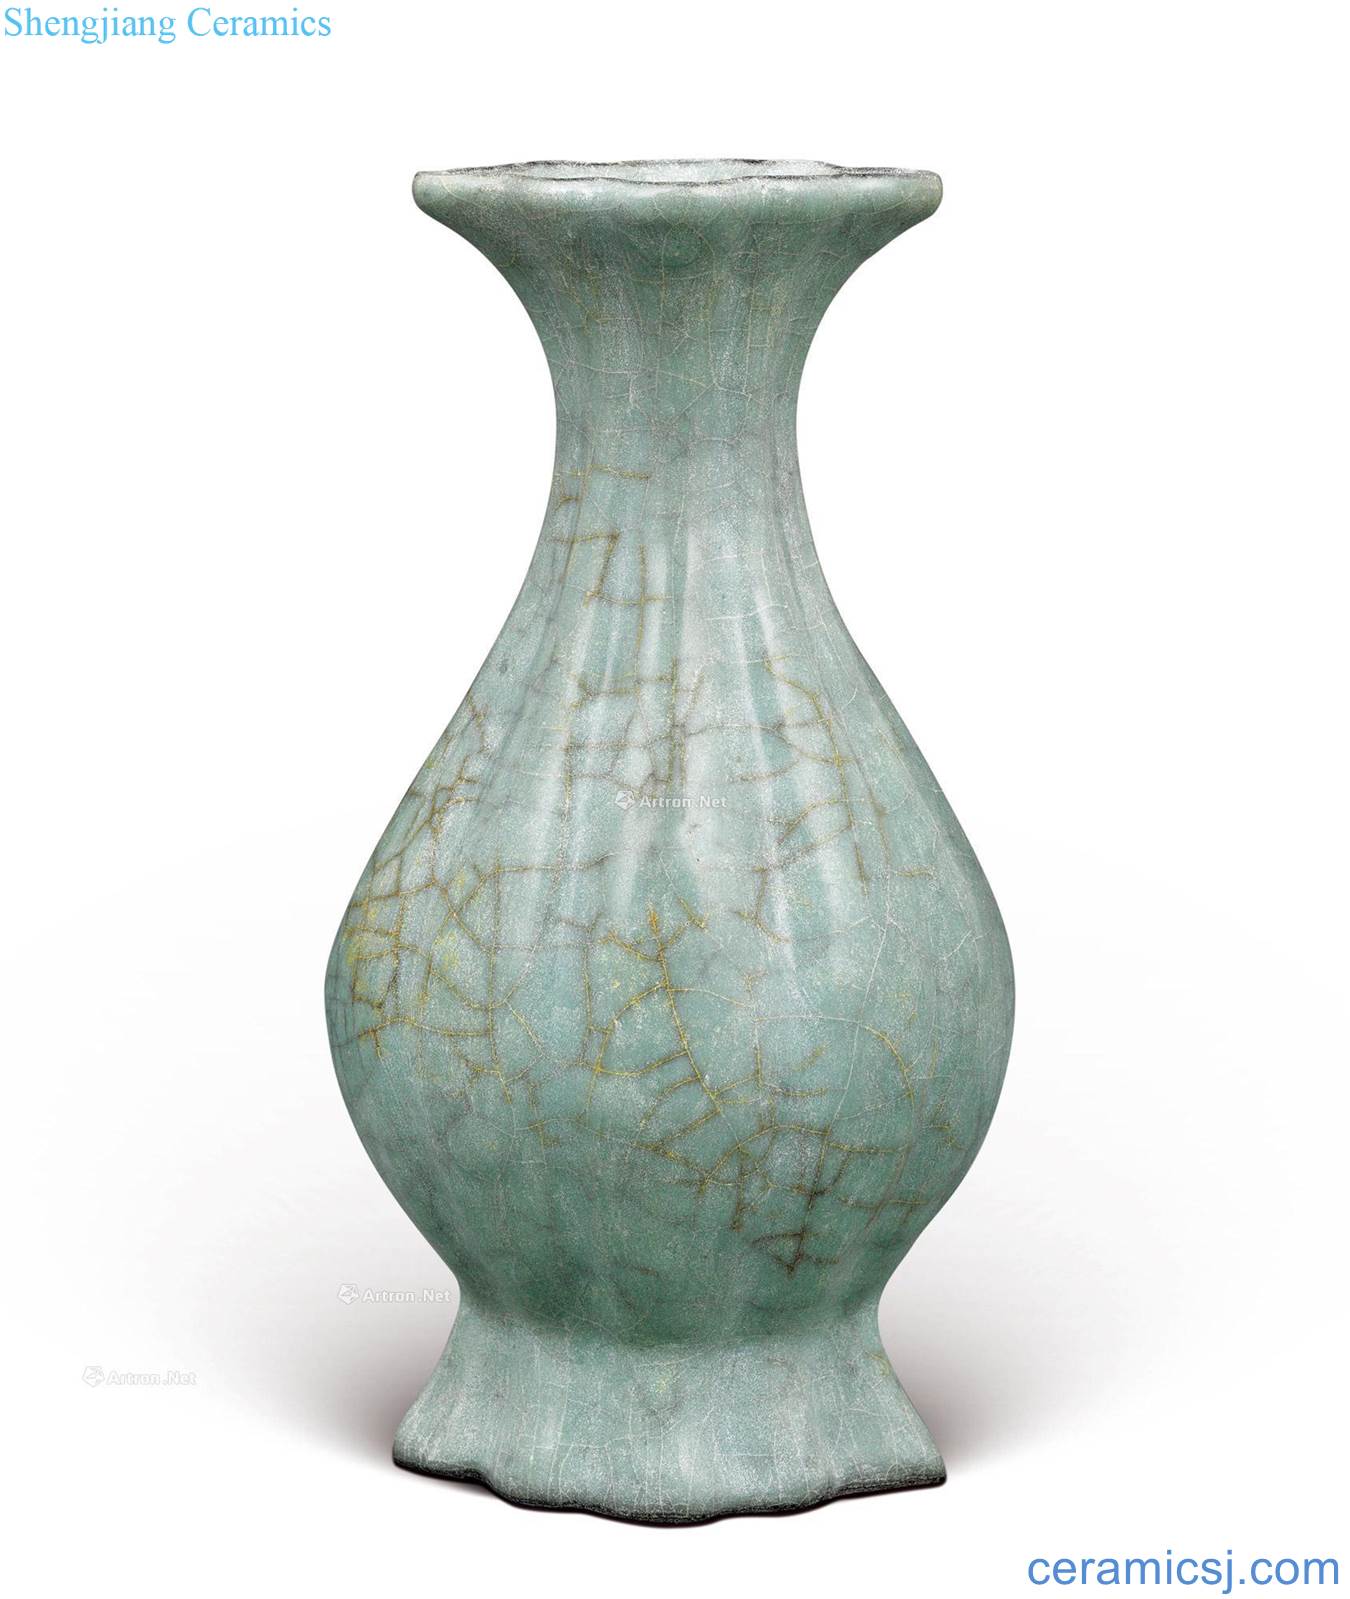 The southern song dynasty kilns by hitom bottles